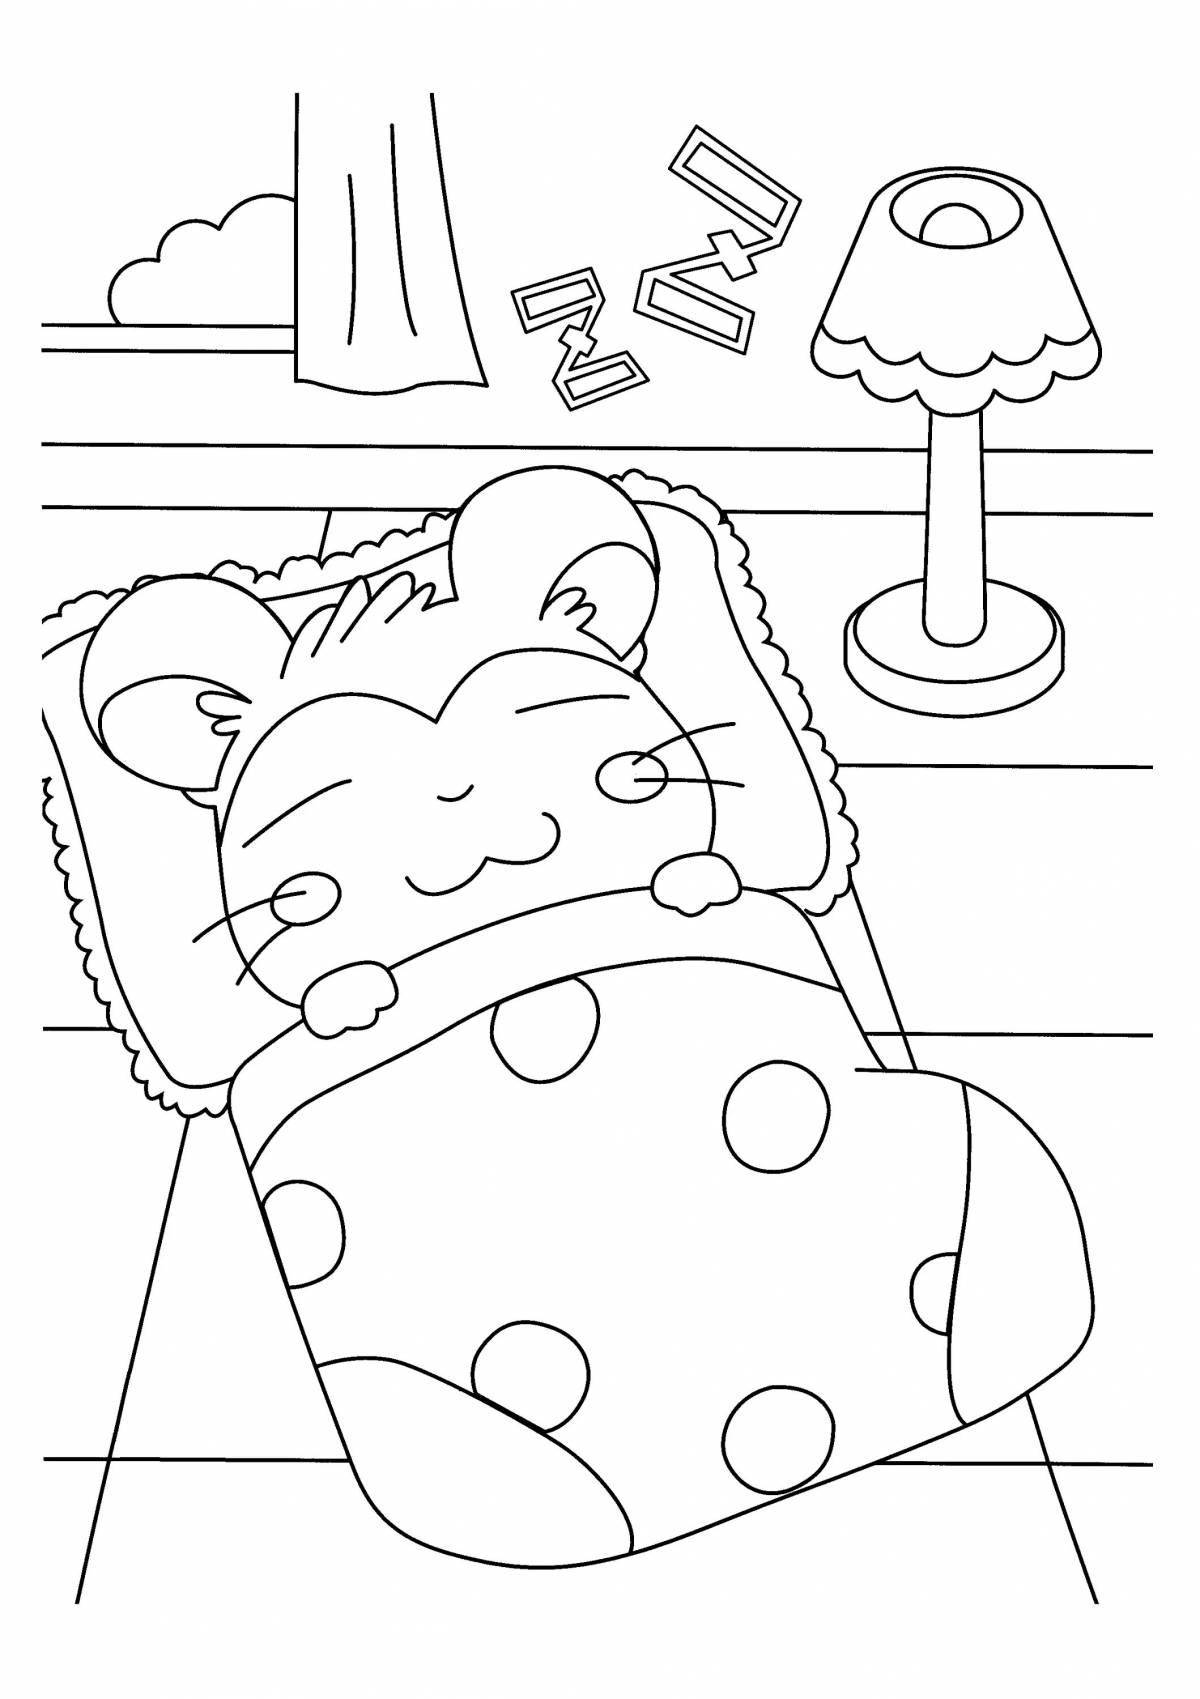 Glowing homa coloring page